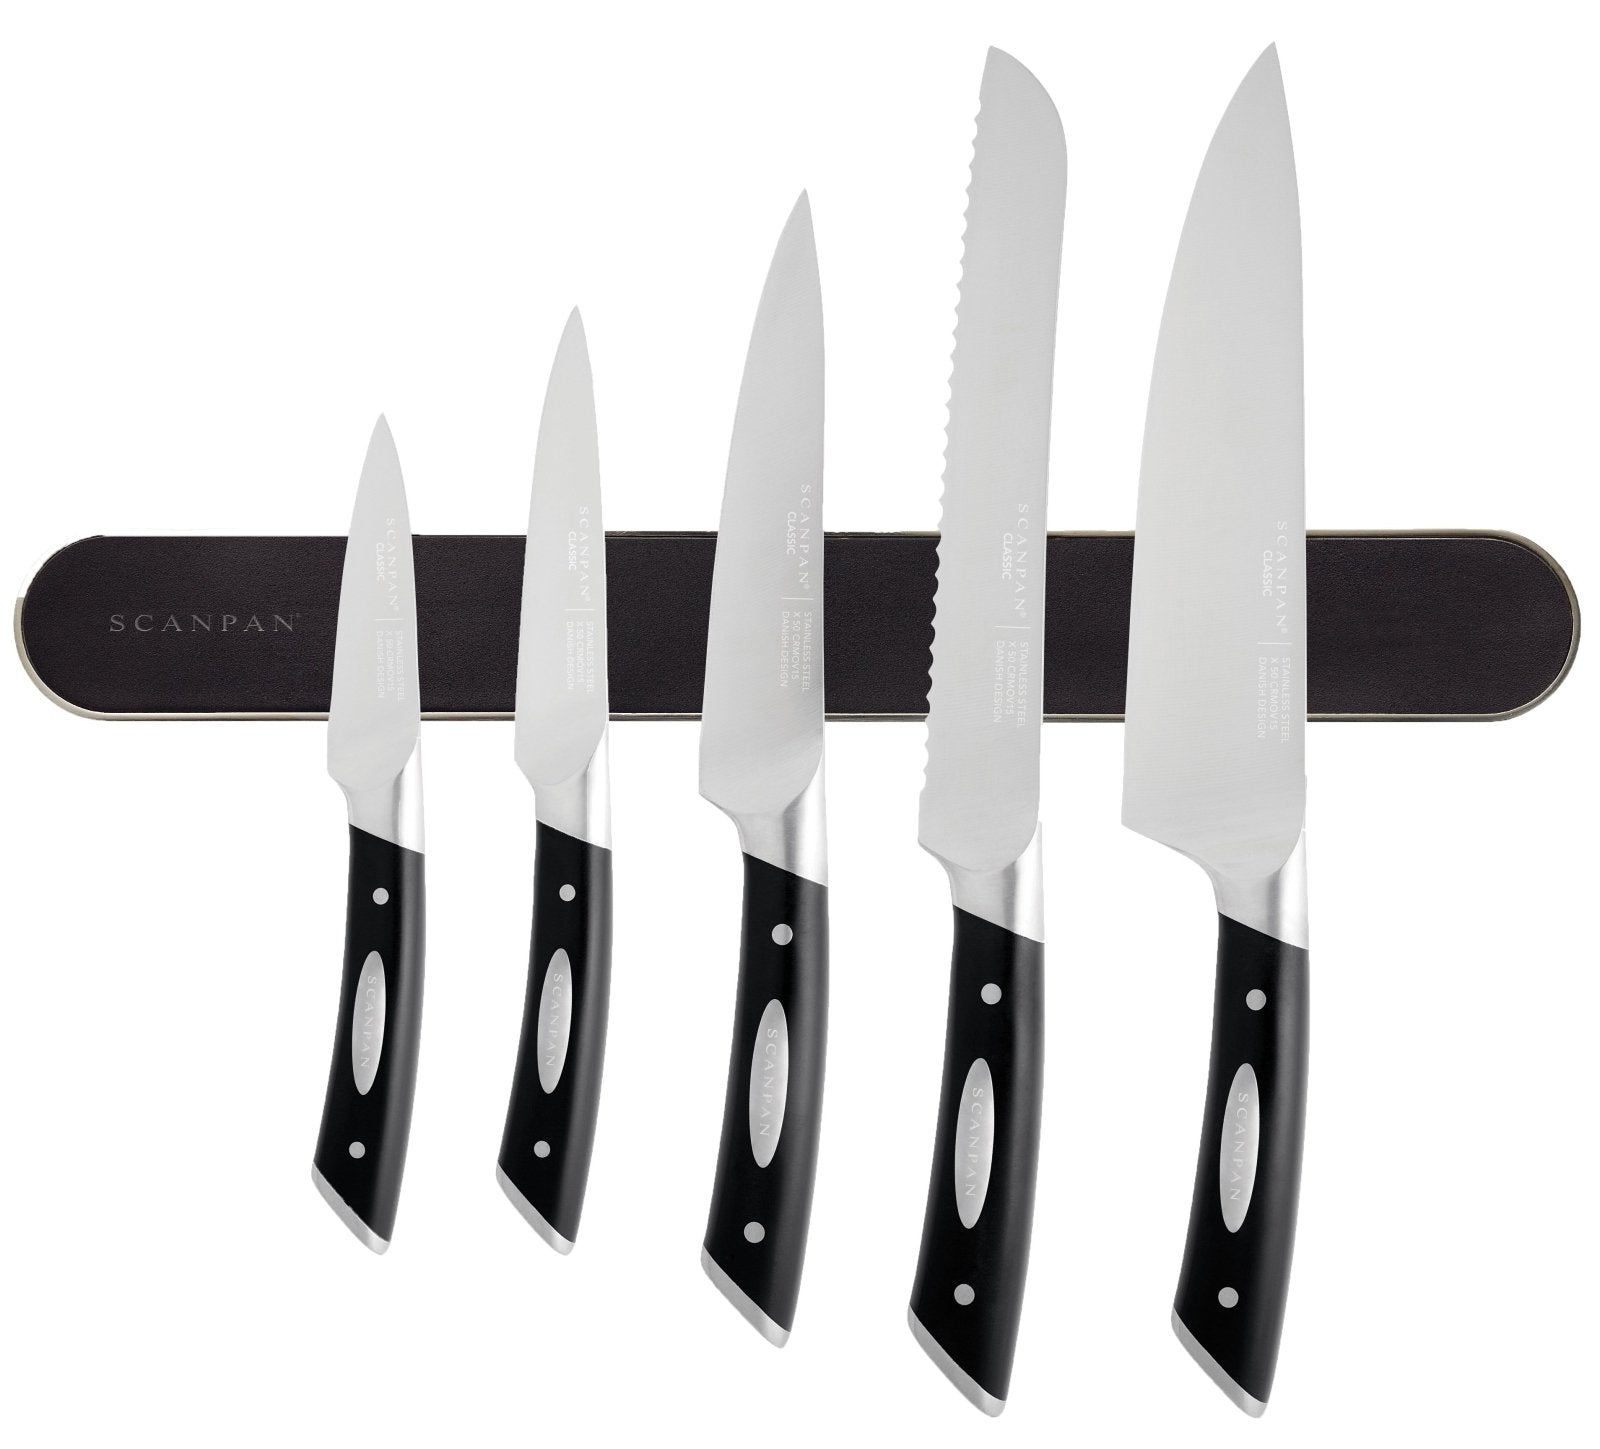 Scanpan Classic 6 Piece Magnetic Rack Set - SP92020600 - The Cotswold Knife Company